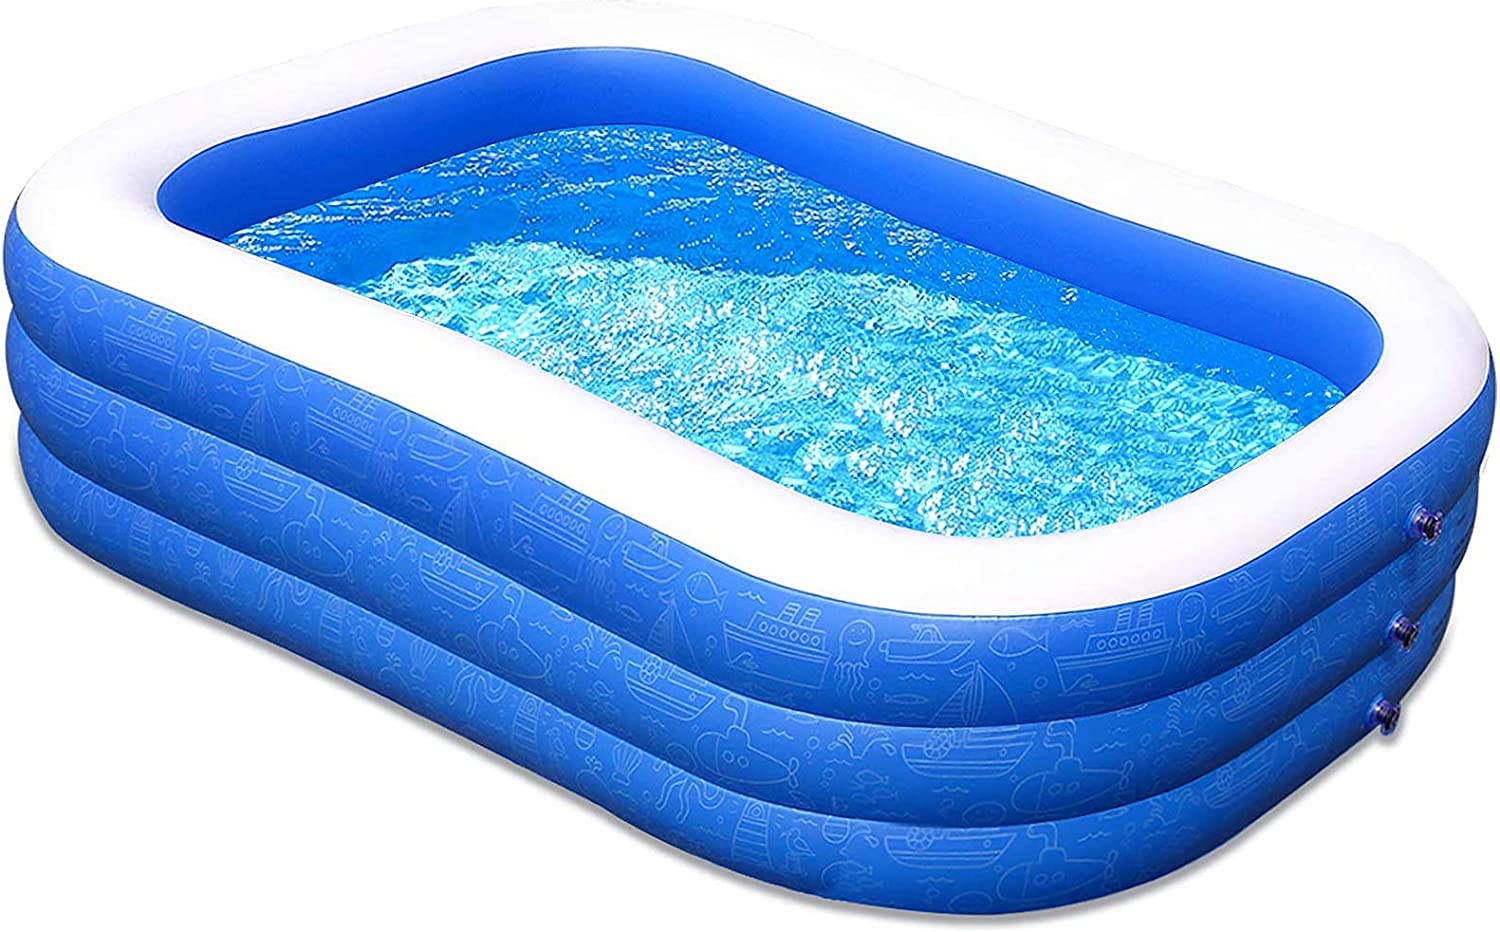 Swimming Pool 120 X 72 X 22 Inflatable Pool Family Size Rectangular Kiddie Pool for Kids Toddlers Playing Ball Pit Easy